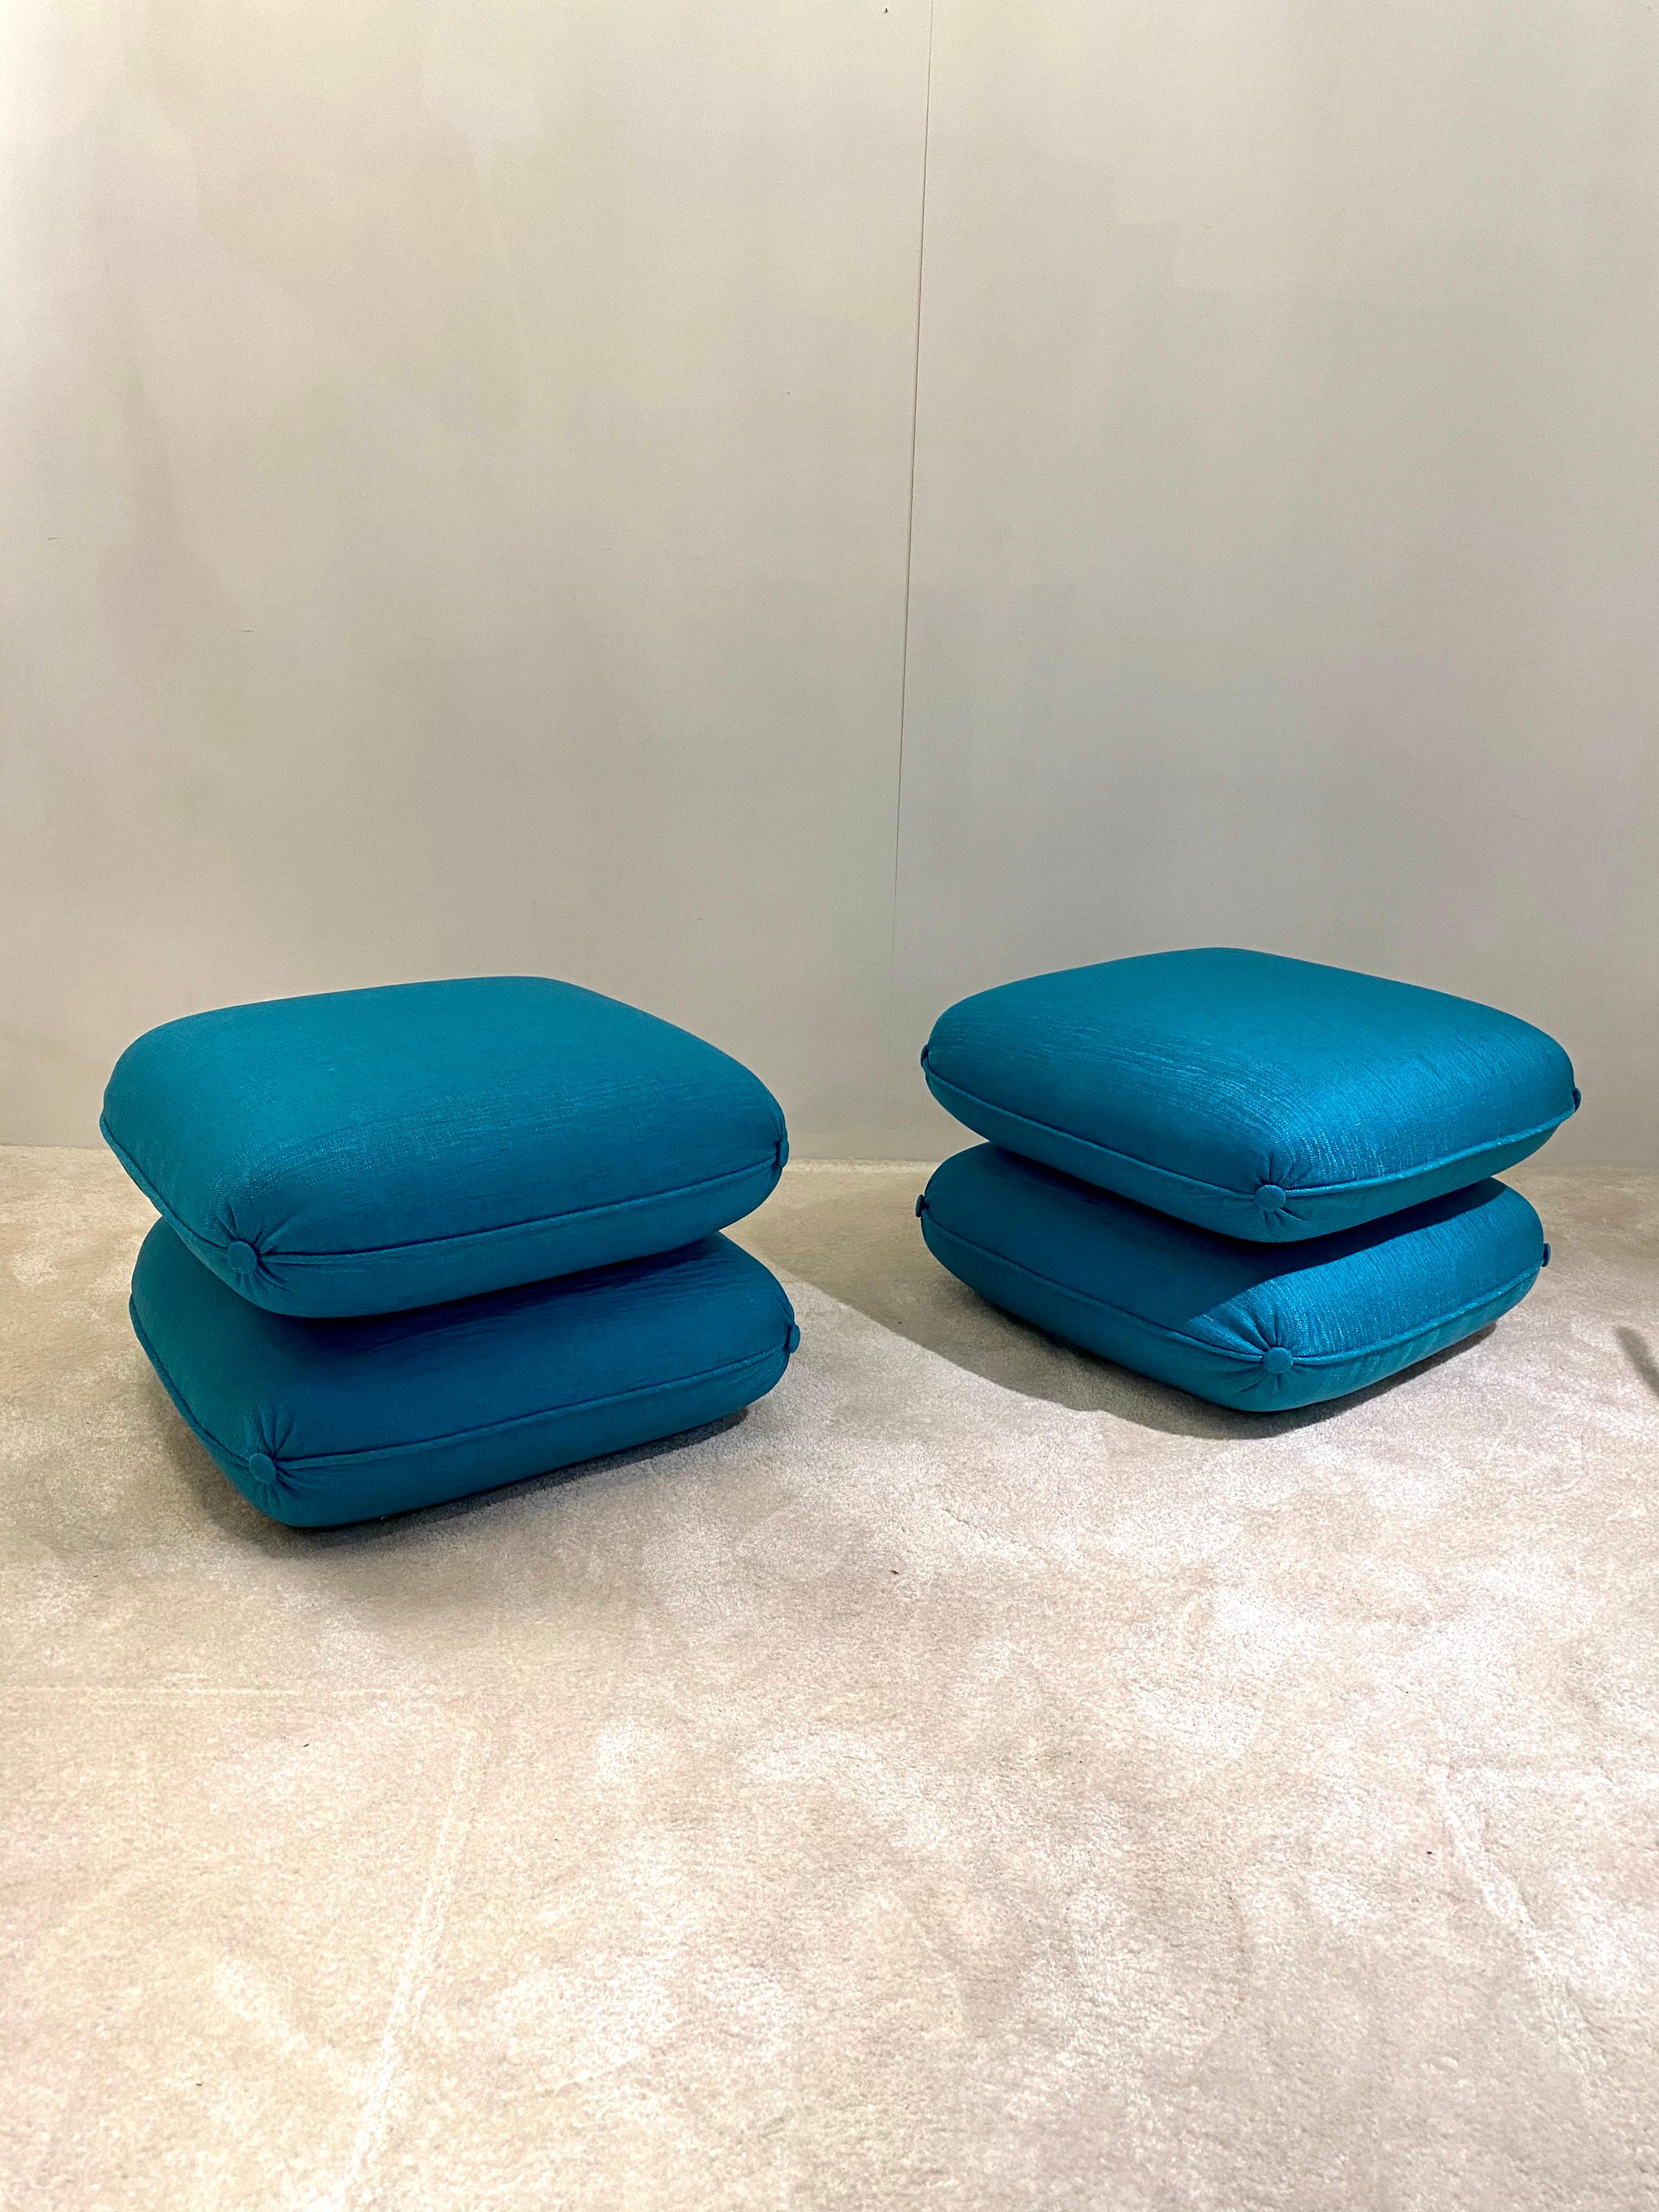 Maison Jansen was well known for his traditional furniture.
From 1970s the French manufacture adjust his taste to be modern and comfy.
These two footstools have been upholstered in a beautiful and strong silk Pierre Frey vibrant turquoise color